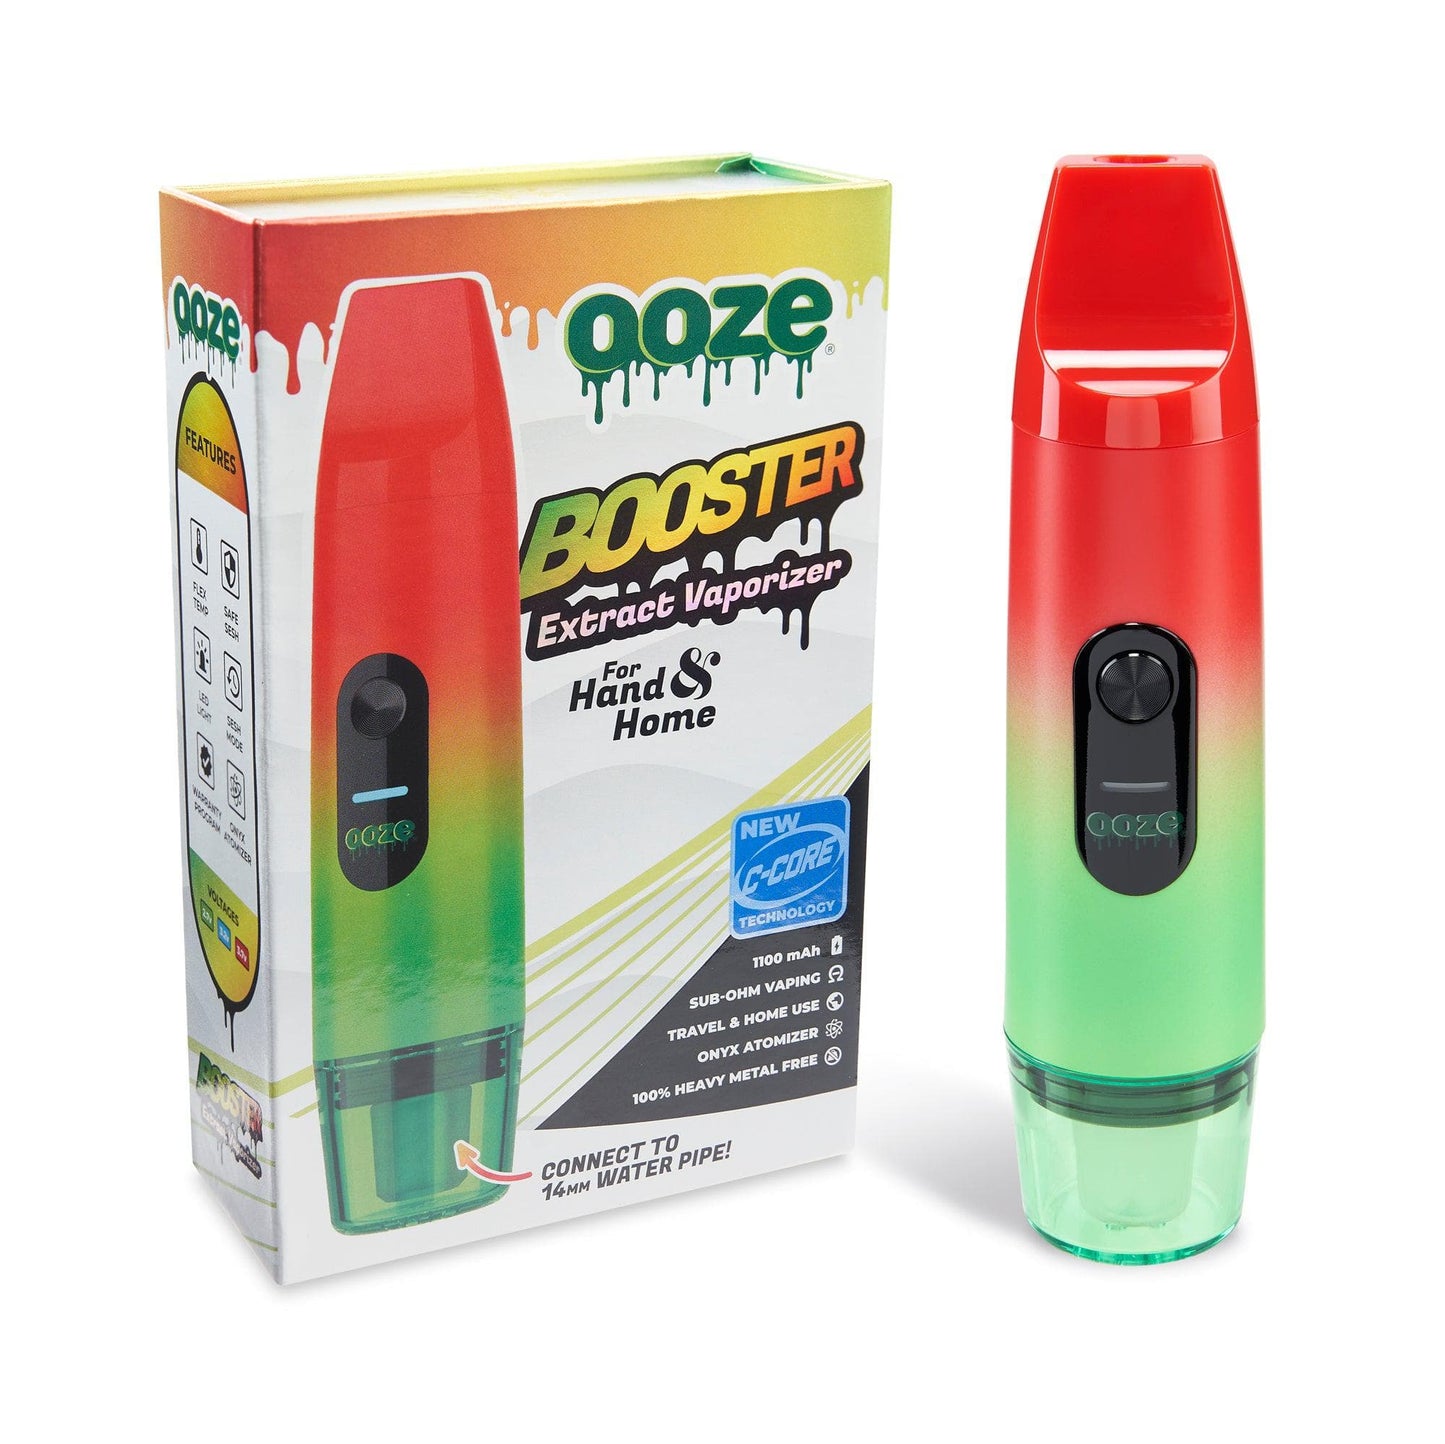 Ooze Batteries and Vapes Rasta Ooze Booster Extract Vaporizer – C-Core 1100 mAh